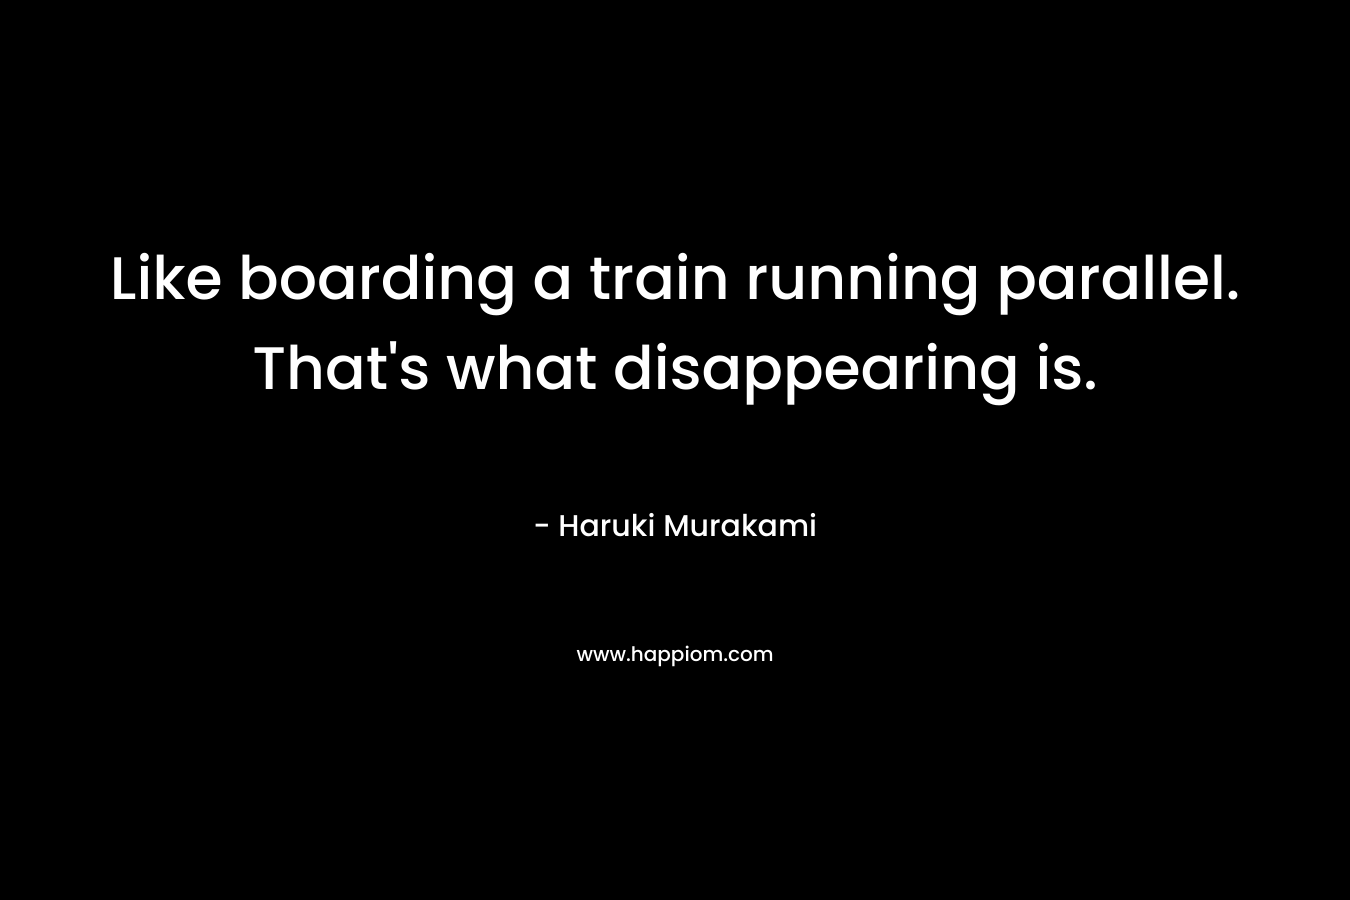 Like boarding a train running parallel. That's what disappearing is.